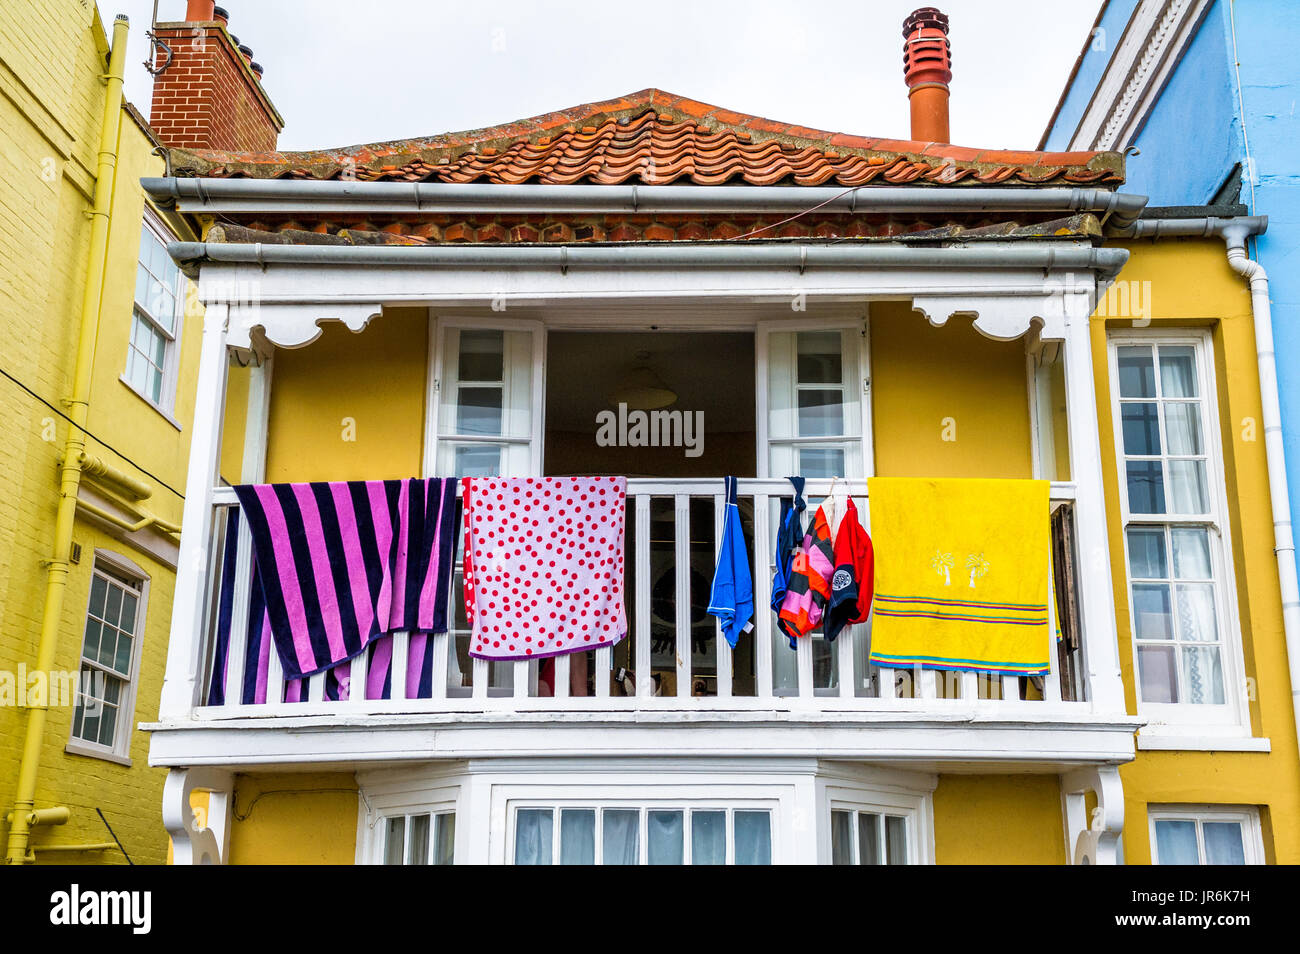 Towels drying on a white railed balcony of a yellow painted house. Stock Photo